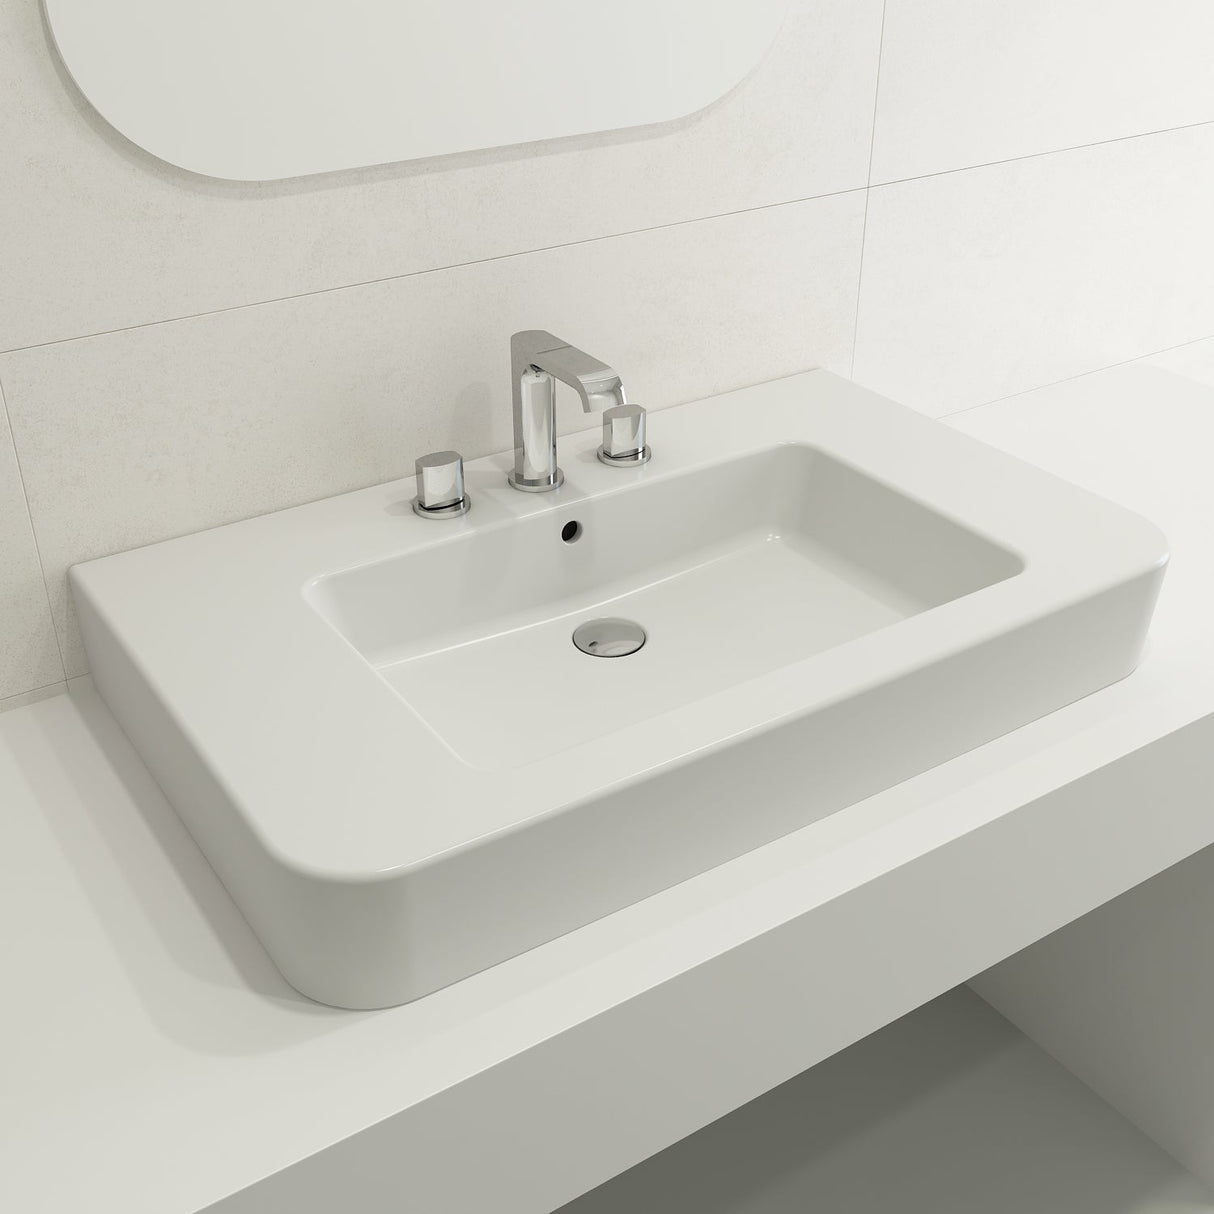 BOCCHI 1124-002-0127 Parma Wall-Mounted Sink Fireclay 33.5 in. 3-Hole with Overflow in Matte White